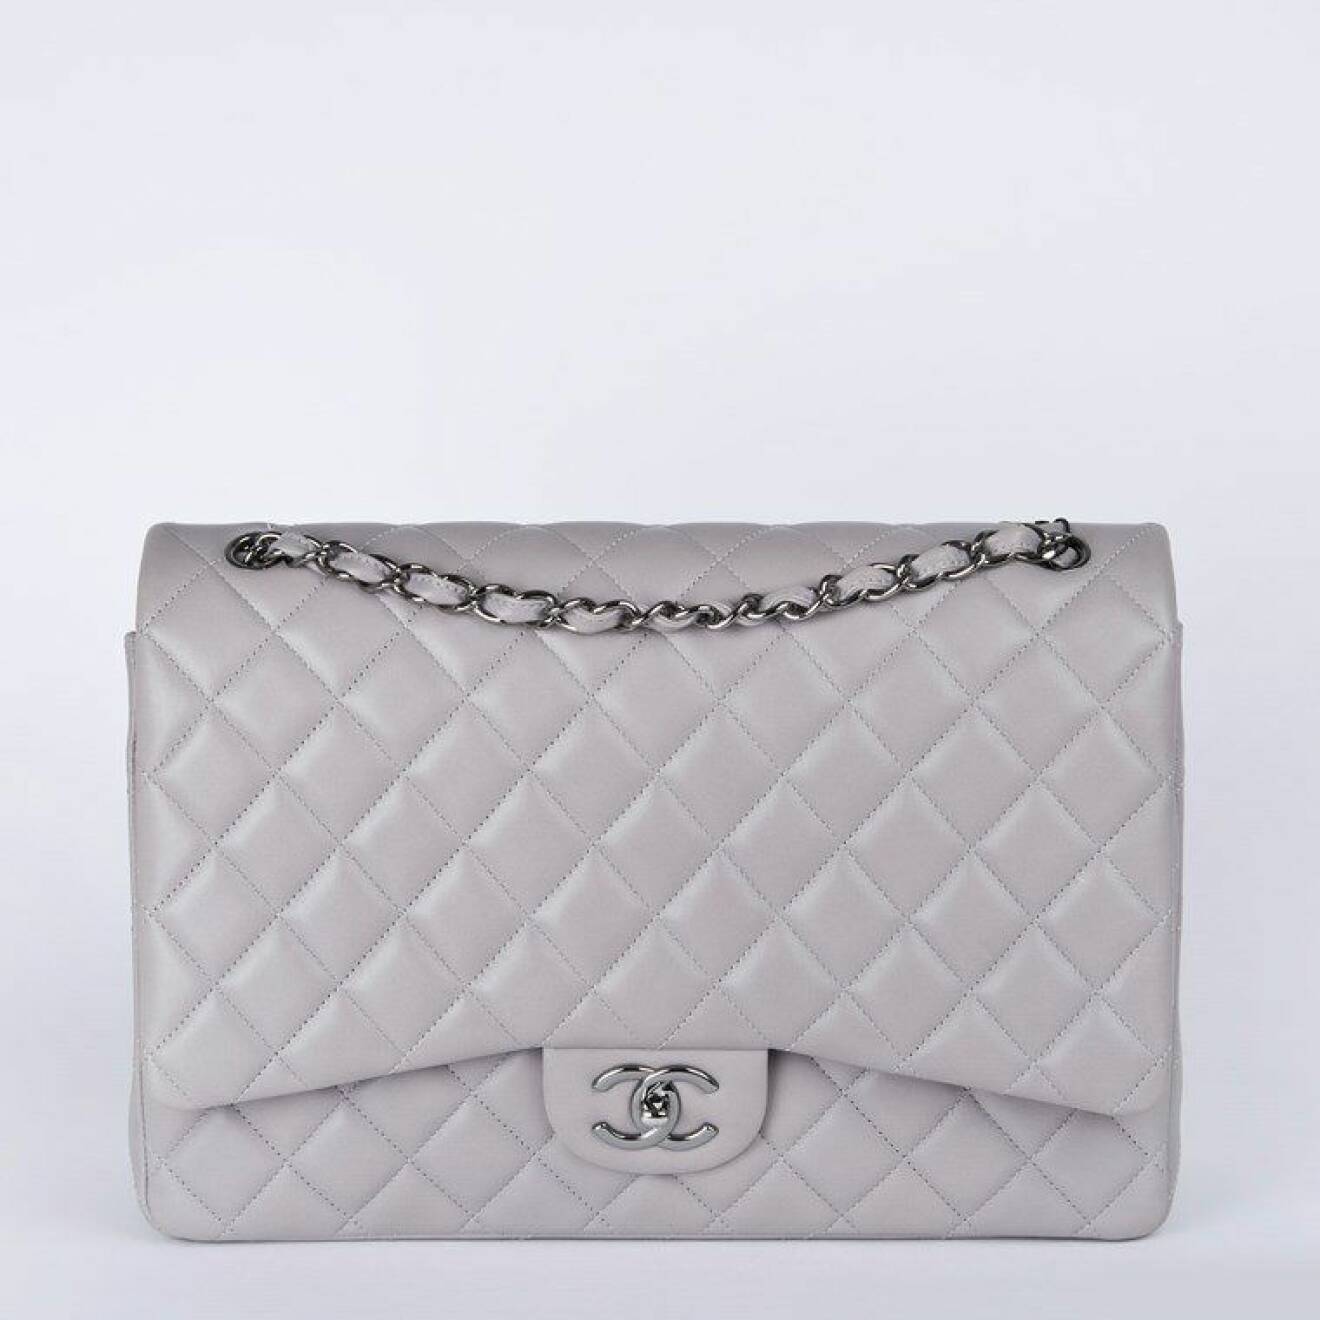 Chanel classic double bag